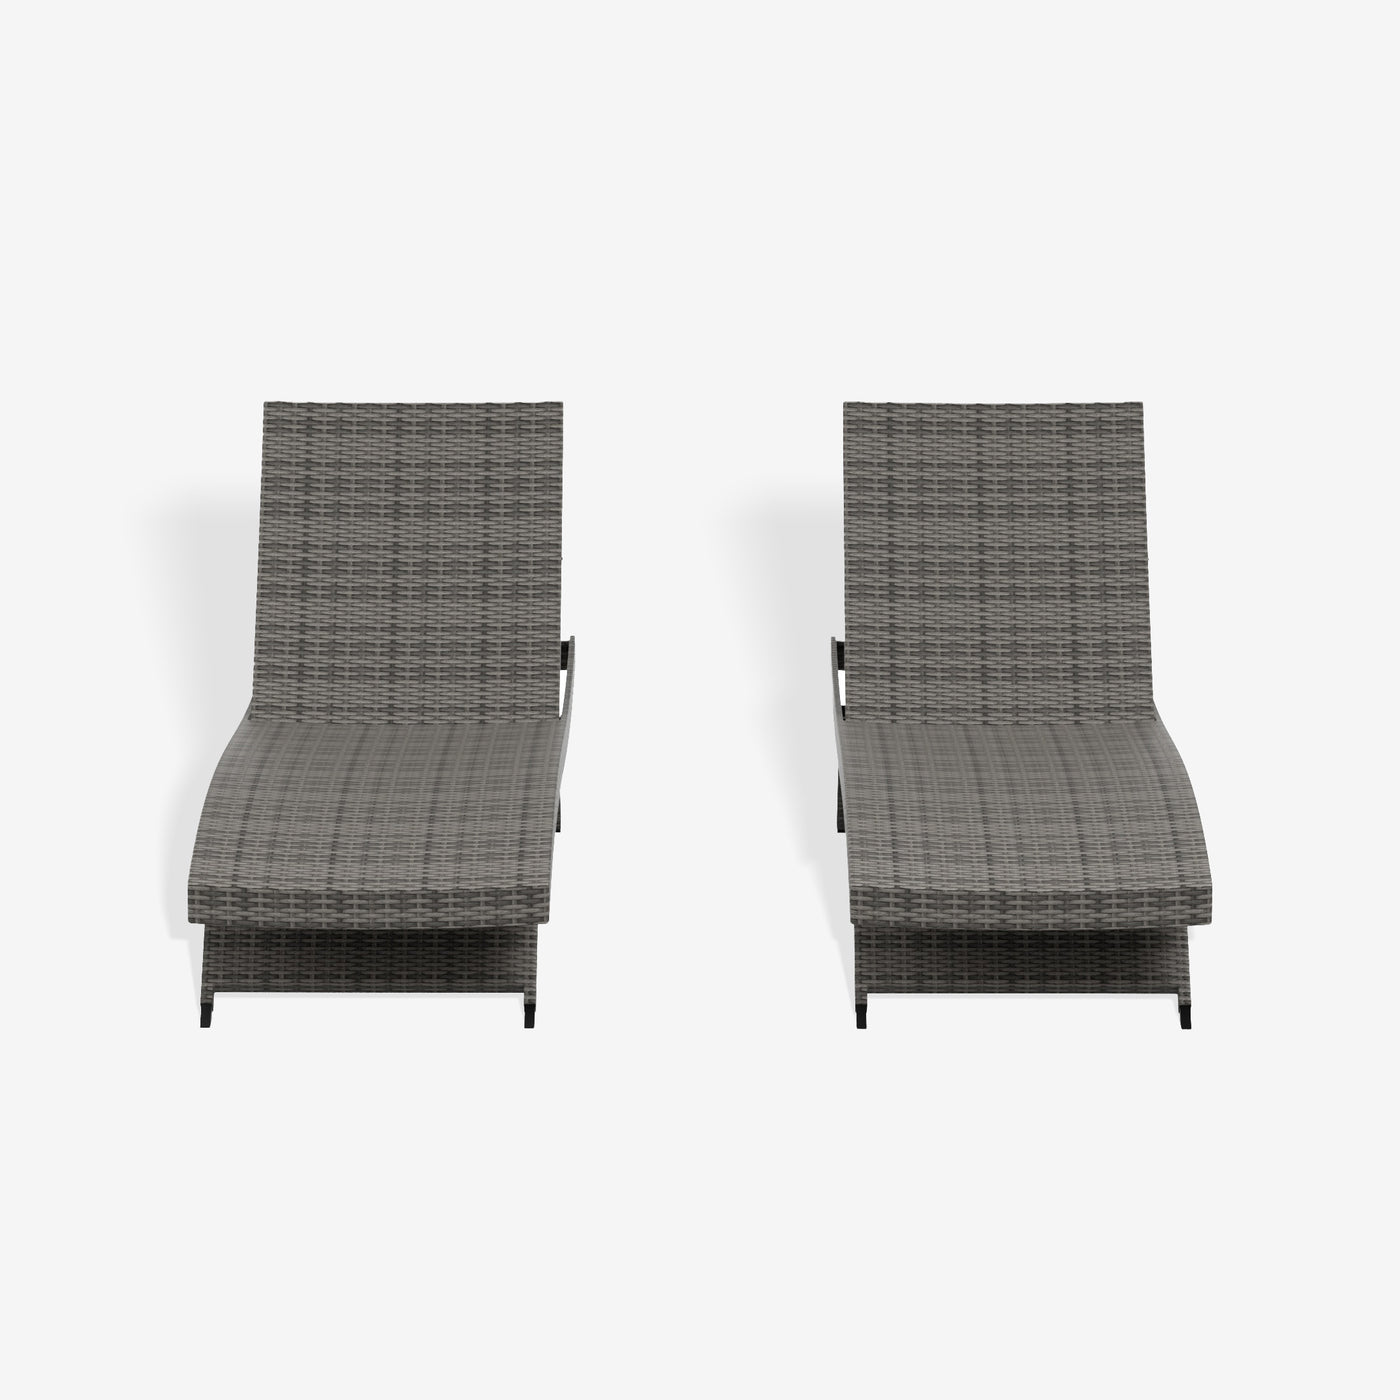 Somerset Rattan Wicker Outdoor Chaise Lounge (Set of 2)